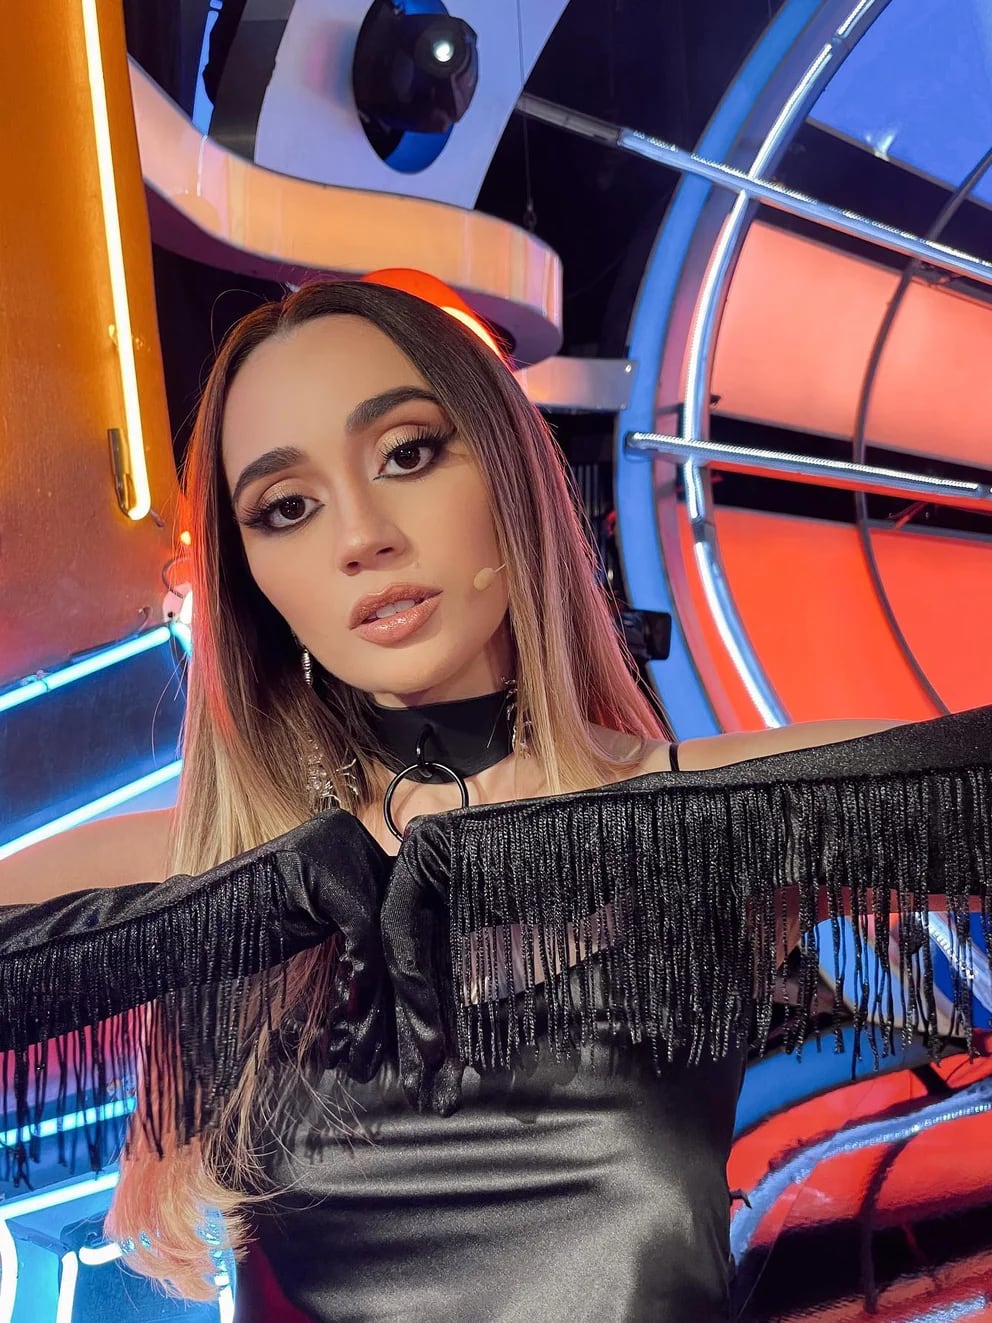 Christian Nodal kissed Carolina Ross on stage: “Incredible talent”